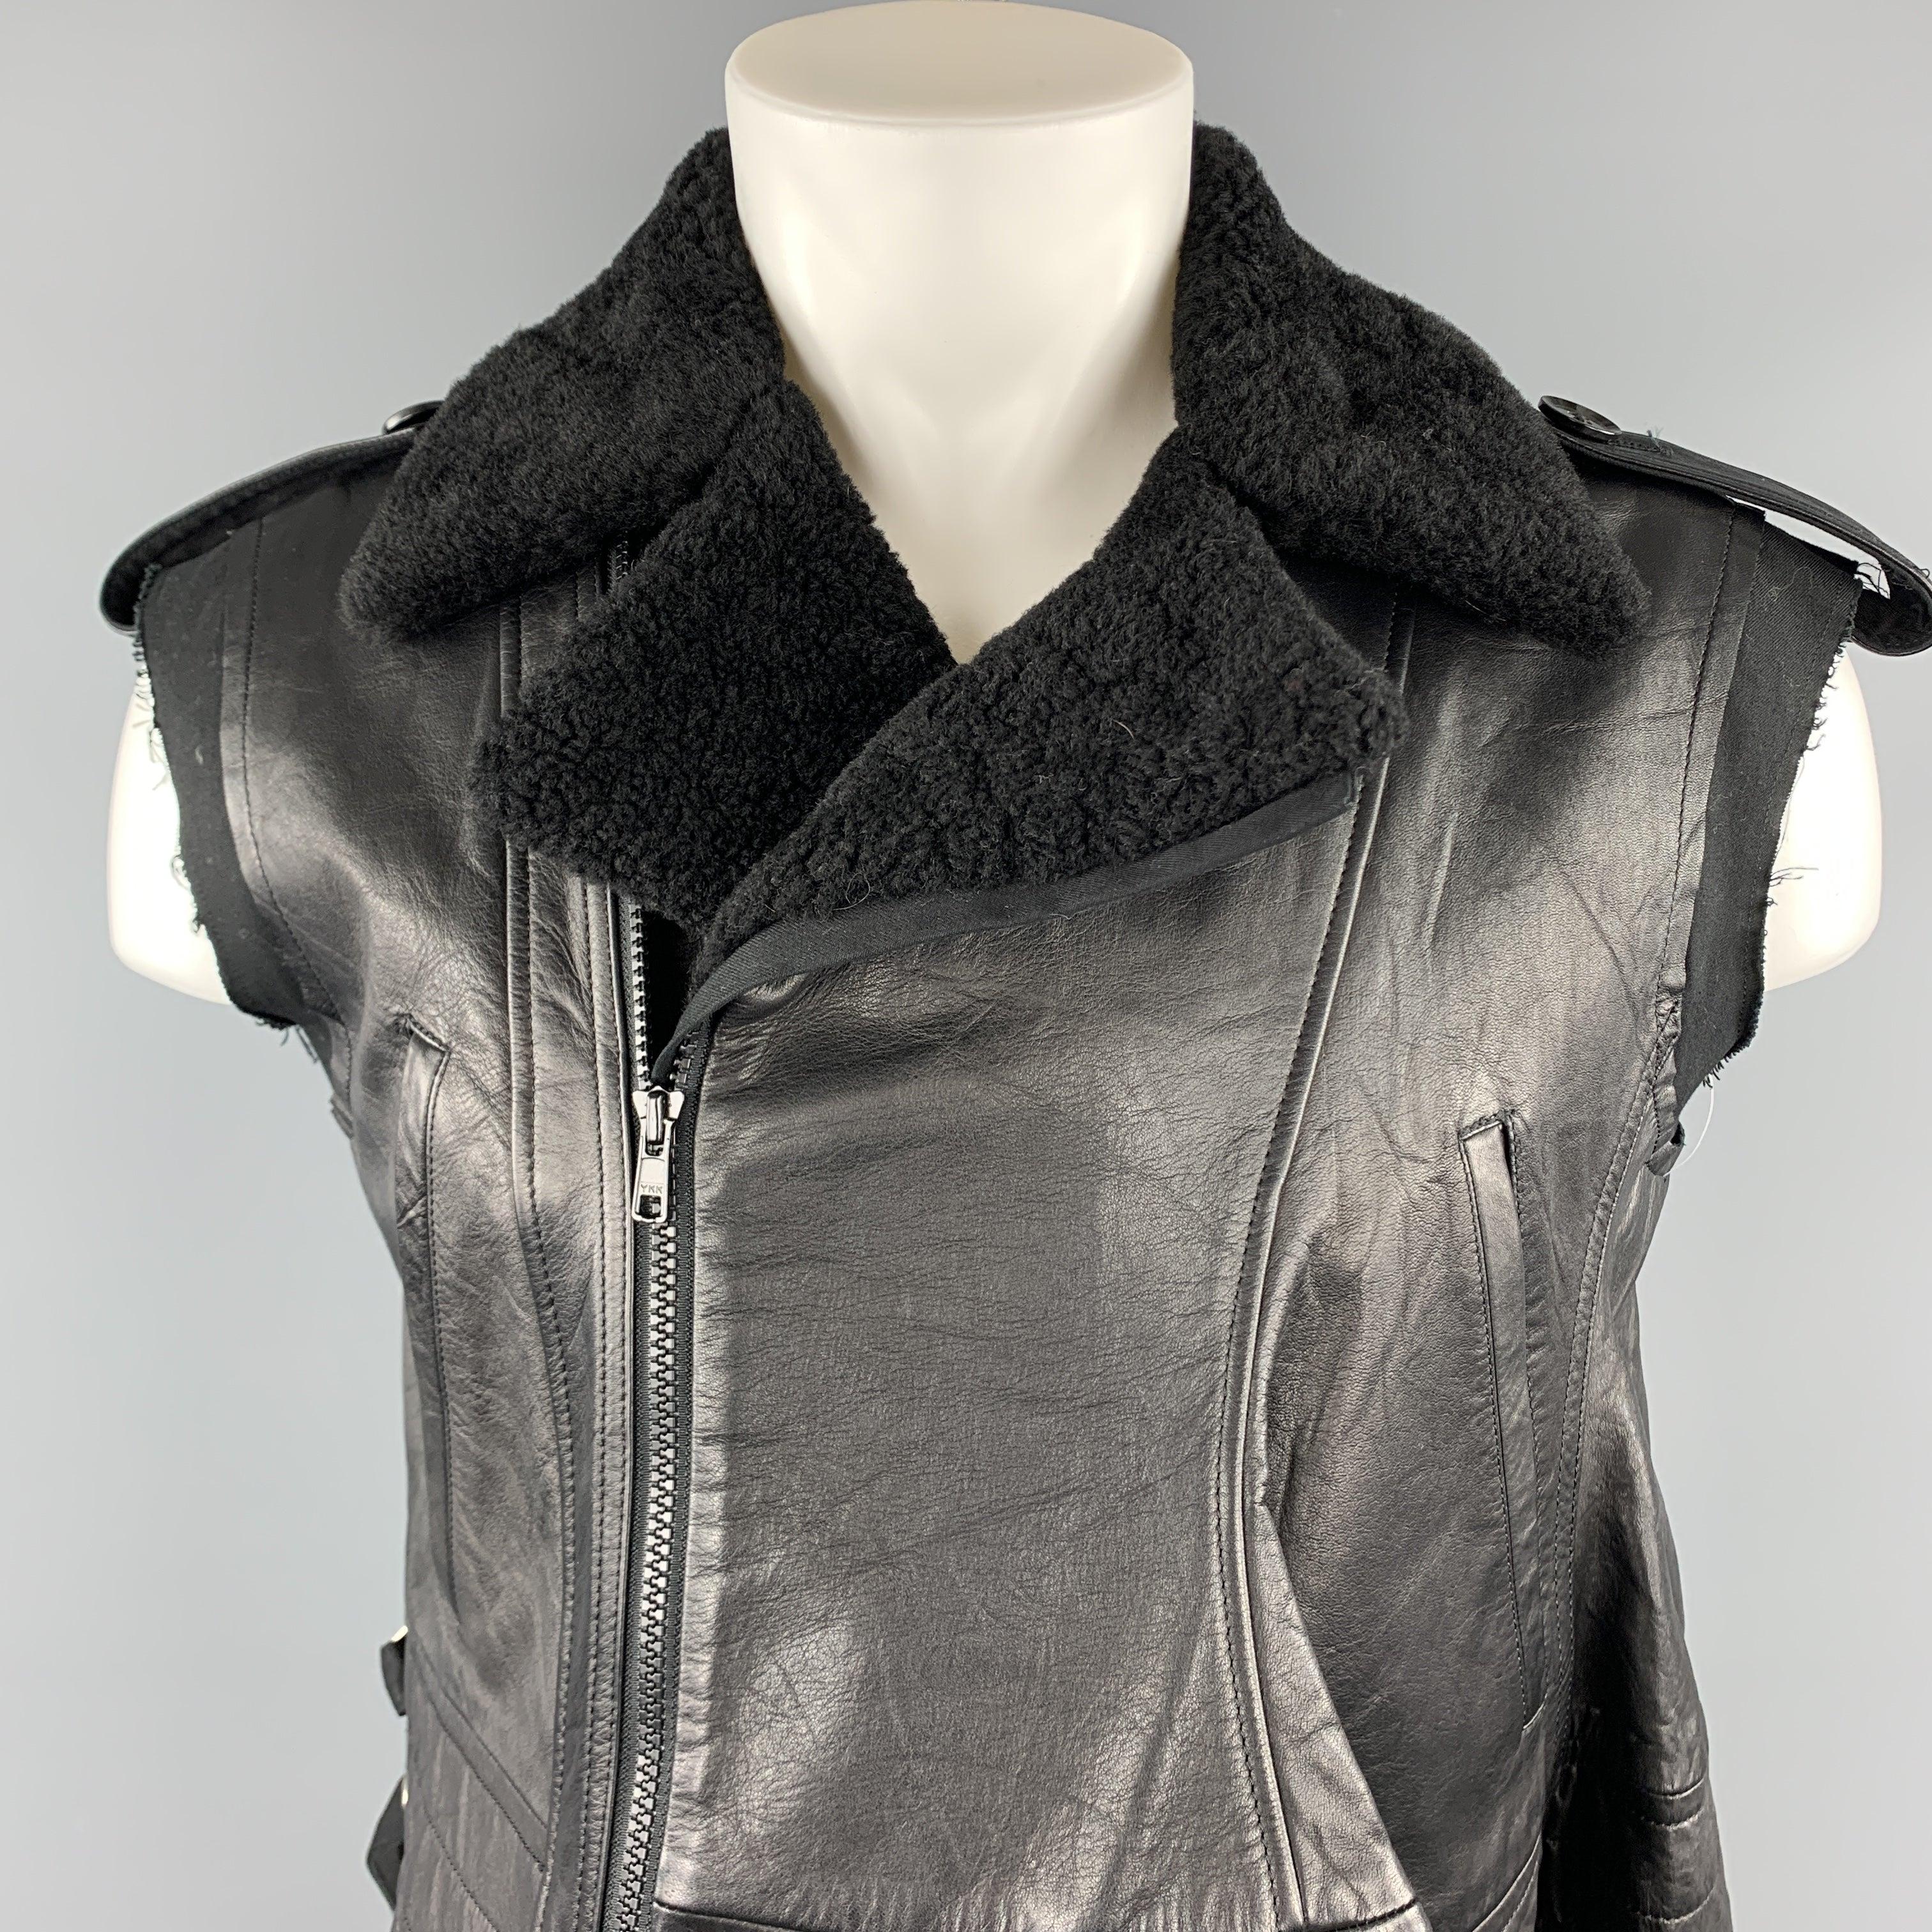 Women's YOHJI YAMAMOTO vest comes in a black sheep skin leather featuring a biker style, distressed cut sleeves, contrast stitching, slit pockets, and a full zip closure. Made in Japan.
Excellent
Pre-Owned Condition. 

Marked:   JP 2 

Measurements: